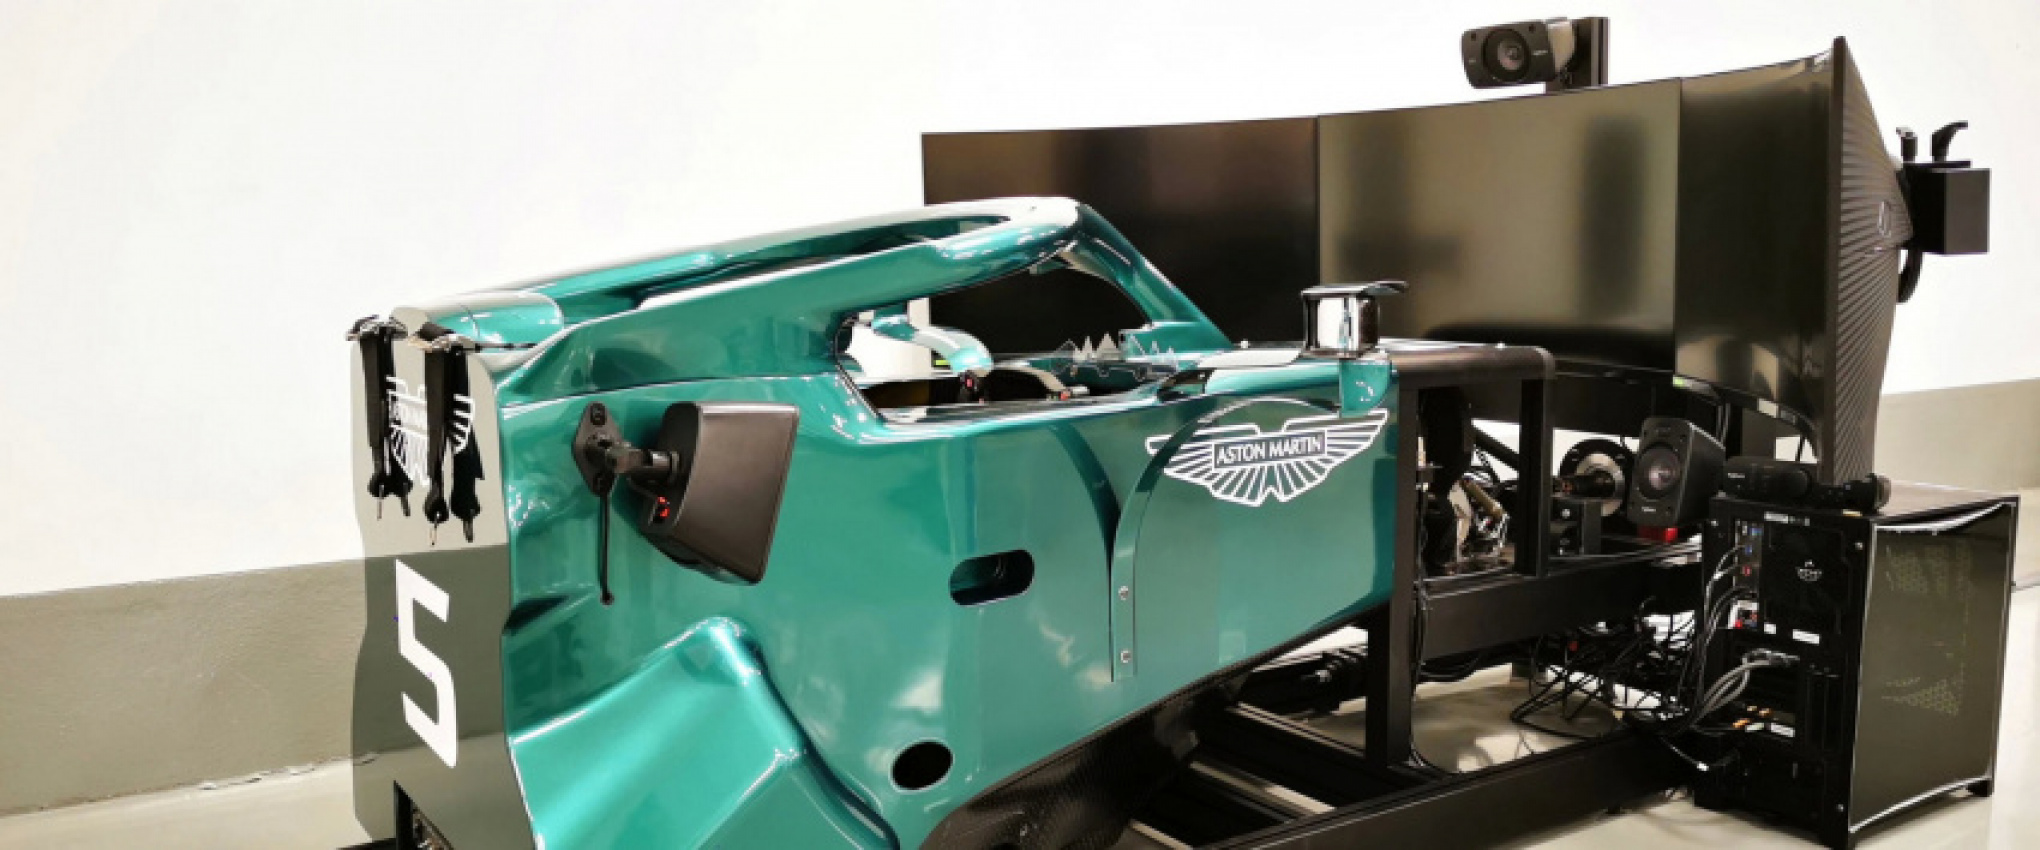 autos, cars, news, aston martin, games, motorsports, racing, sebastian vettel’s new home racing sim rig is made from an actual f1 car